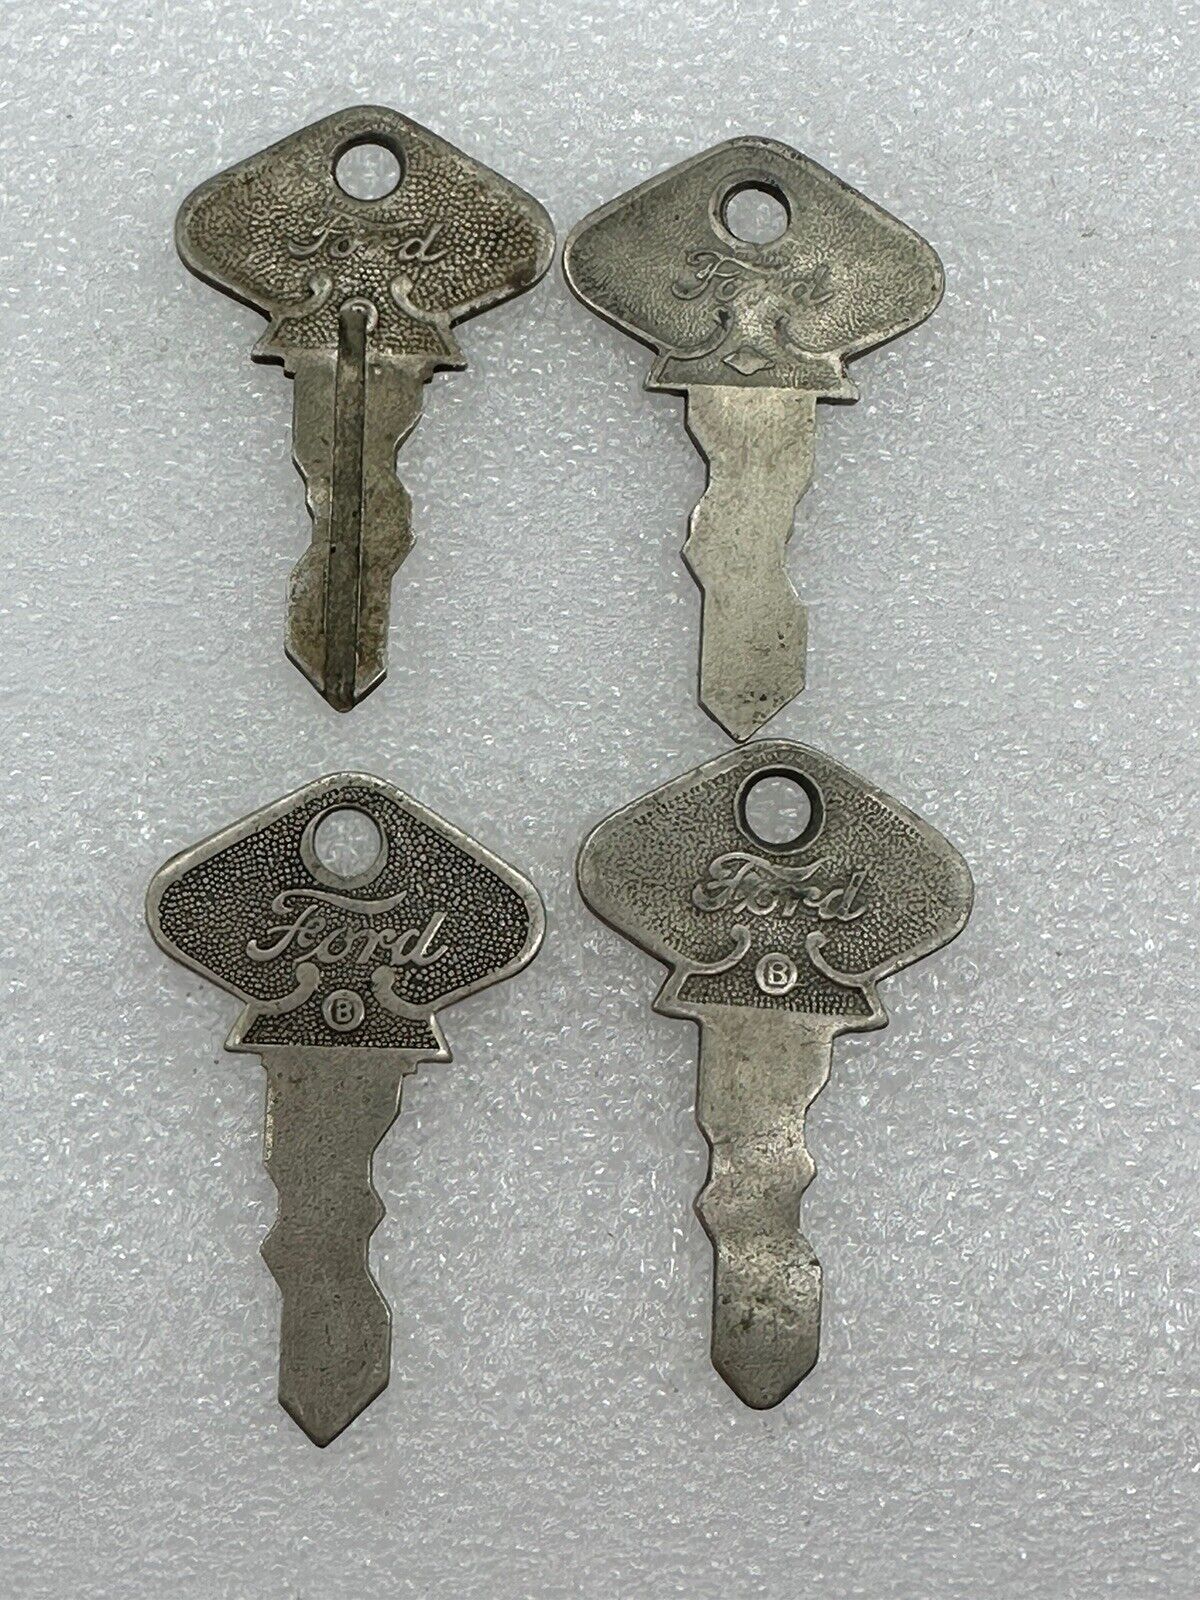 Antique Ford Model T Keys Lot Of 4 With Ford Script 61 62 63 64